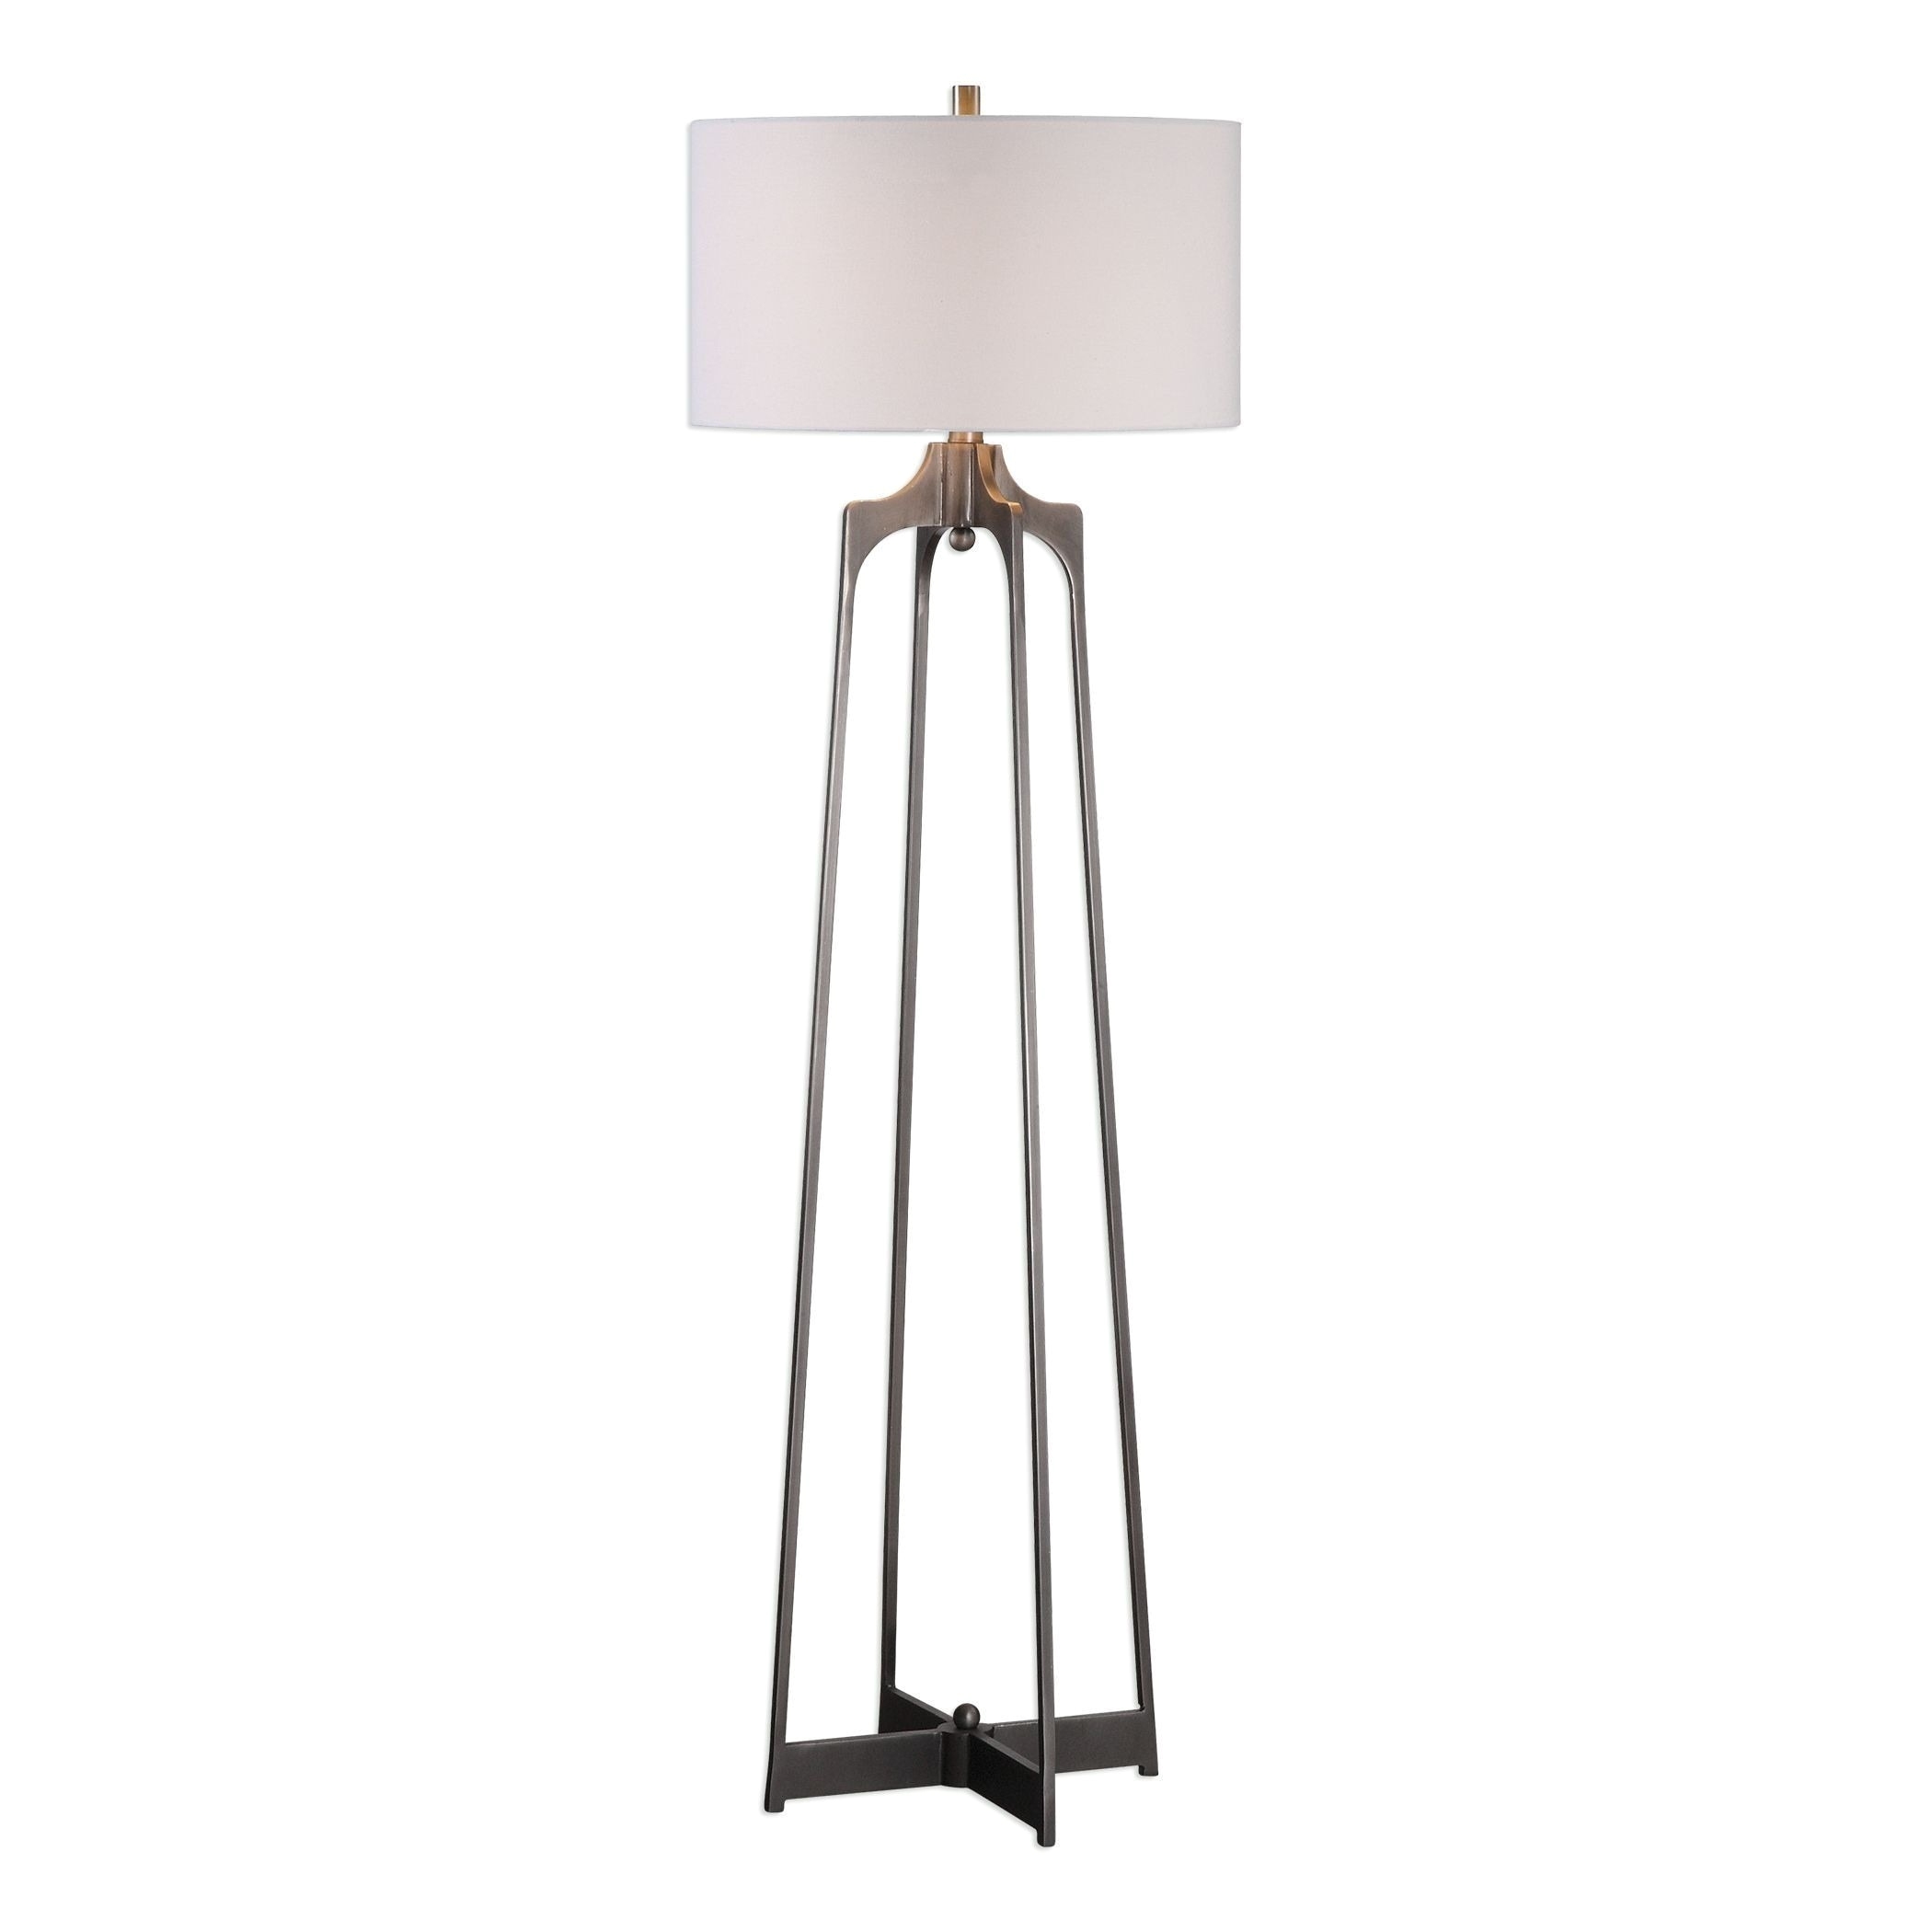 terrific standing lamps for living room or all modern floor lamps best lamps cottage lamps cottage lamps 0d